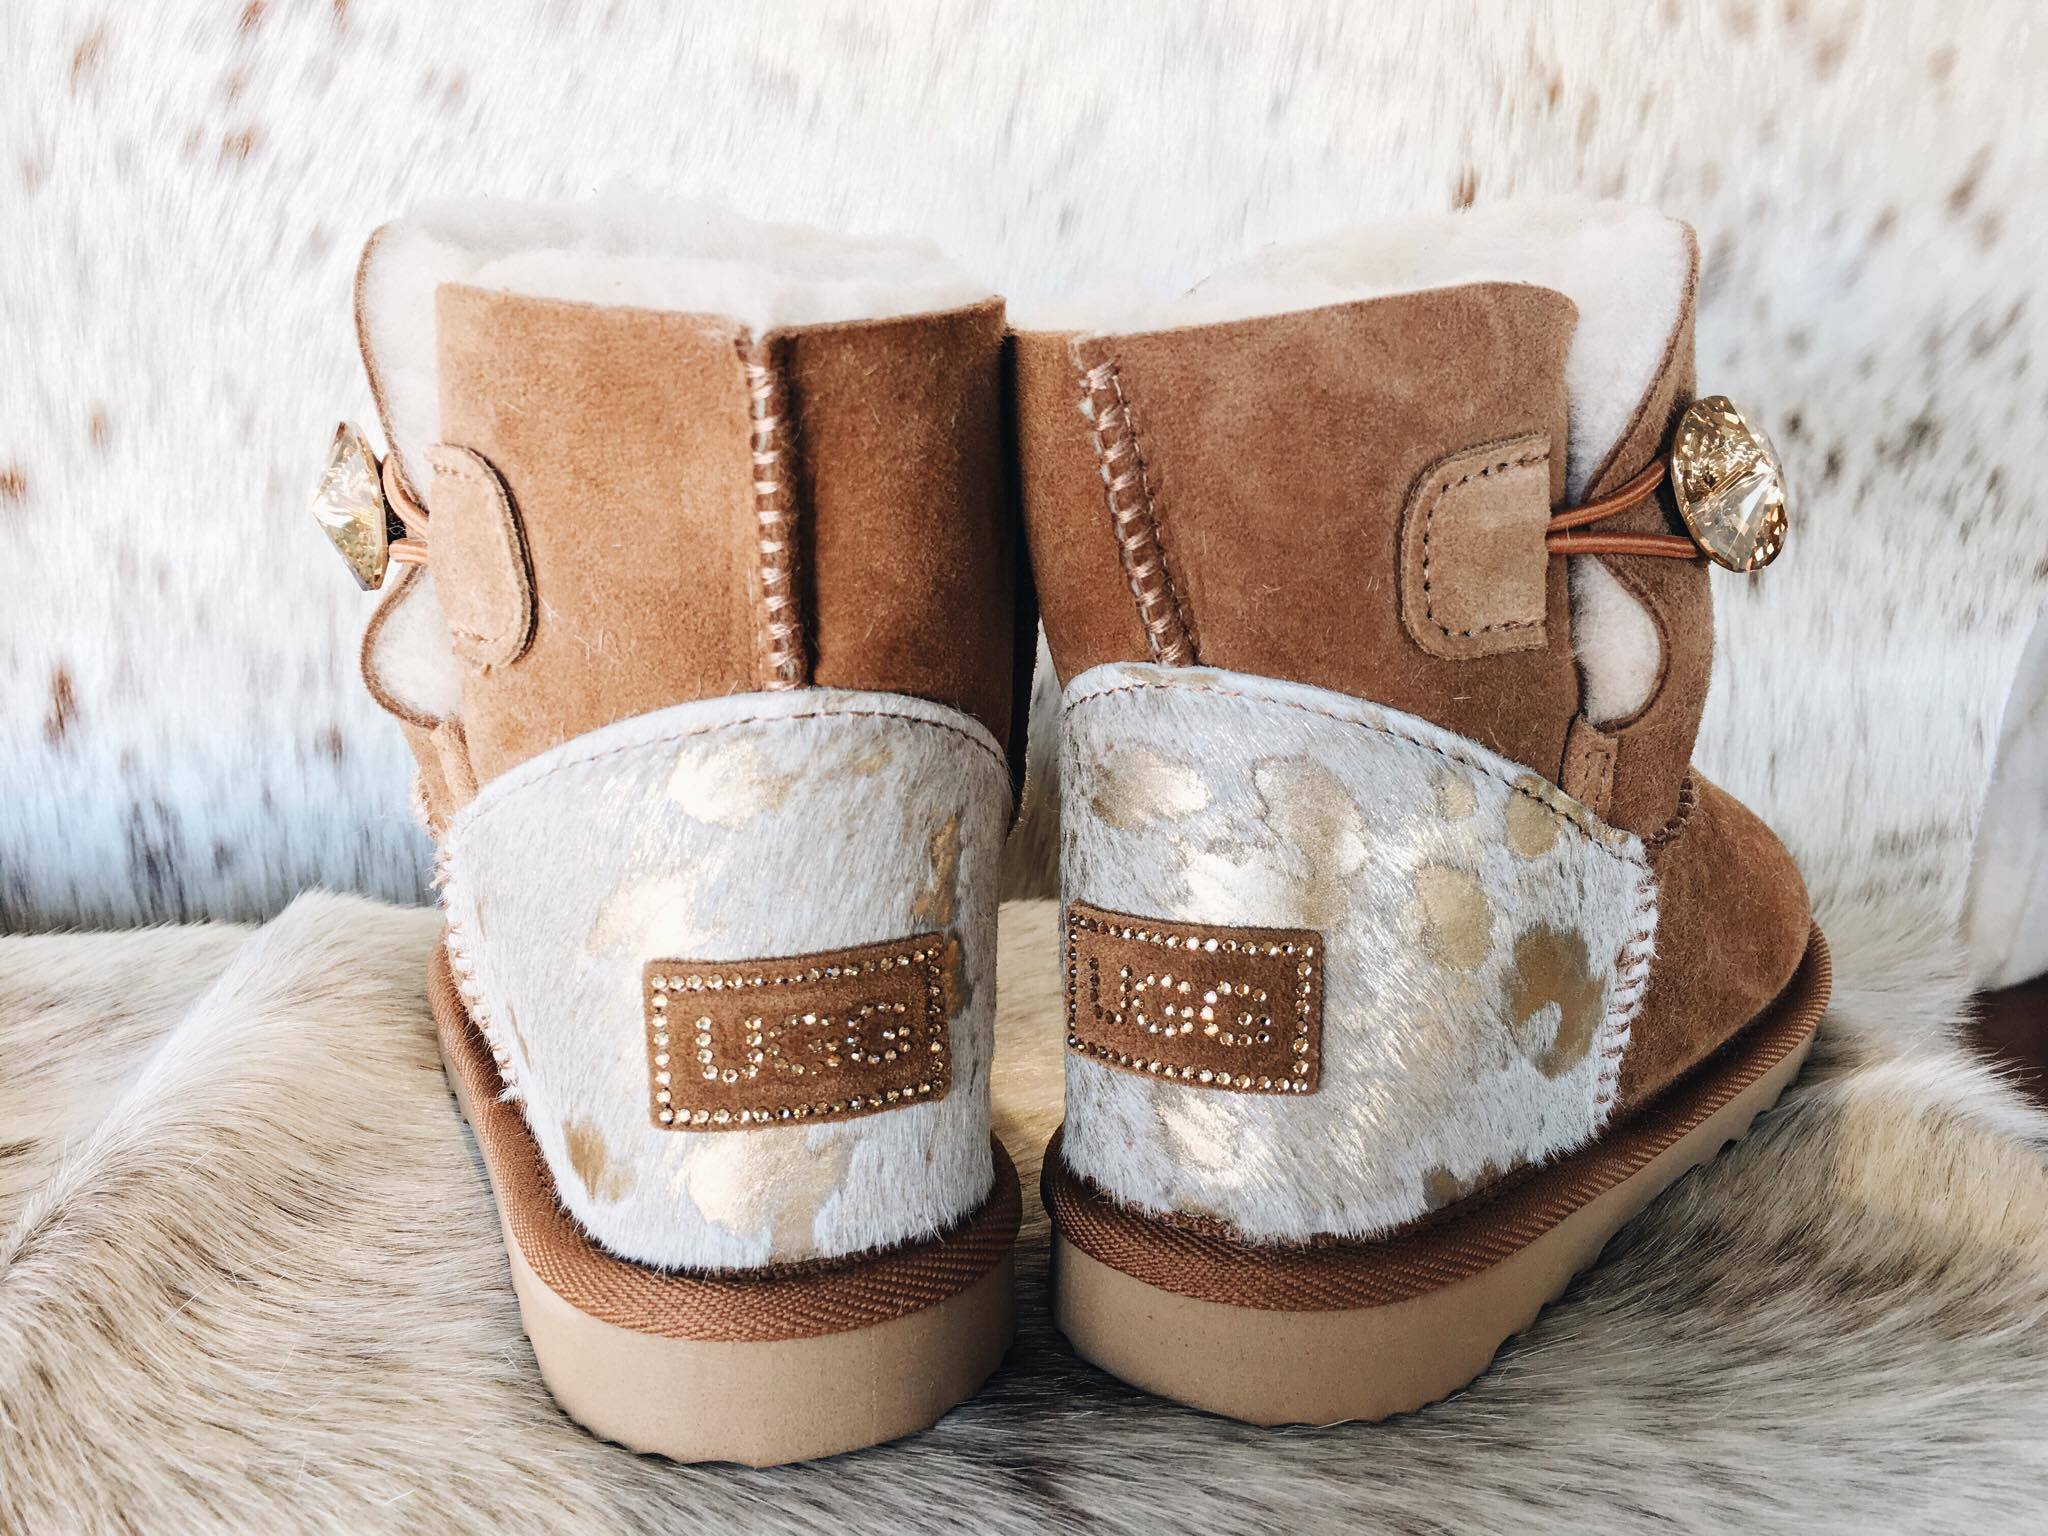 UGG Since 1974 on X: "Enjoy luxe comfort.. #uggsince1974 #australianmade # uggs #comfort #fashion #luxury #fashionista #style https://t.co/Hg2gNmjEnY"  / X